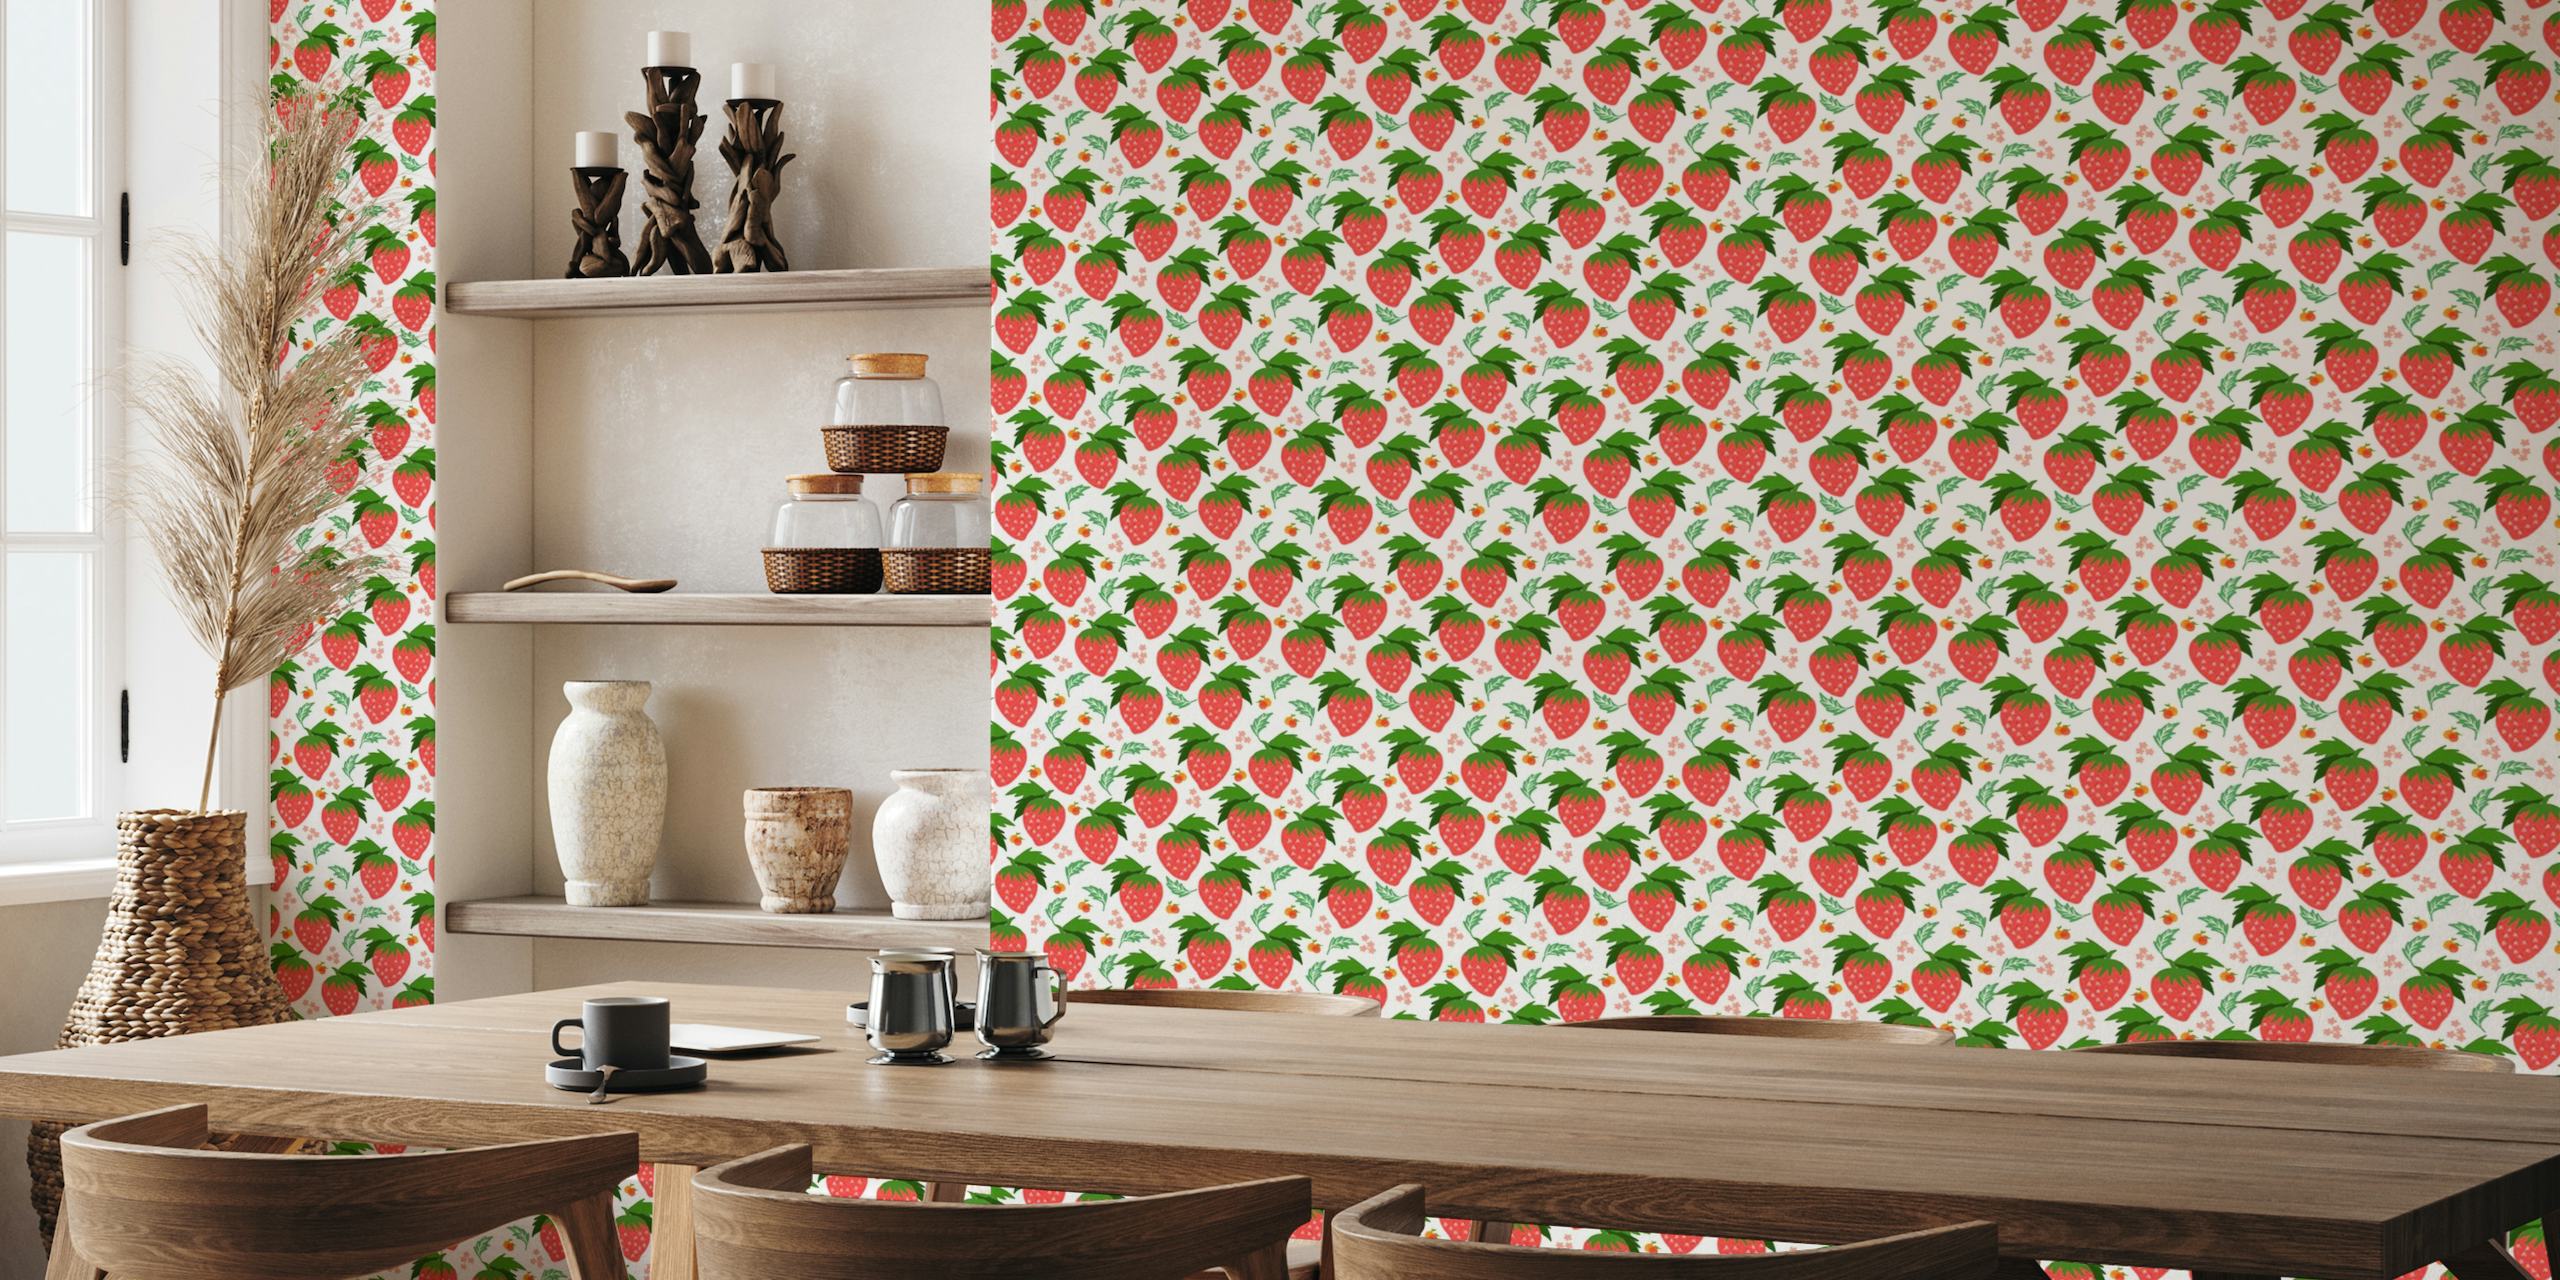 Strawberries fruit tropical pattern on a white background papel de parede